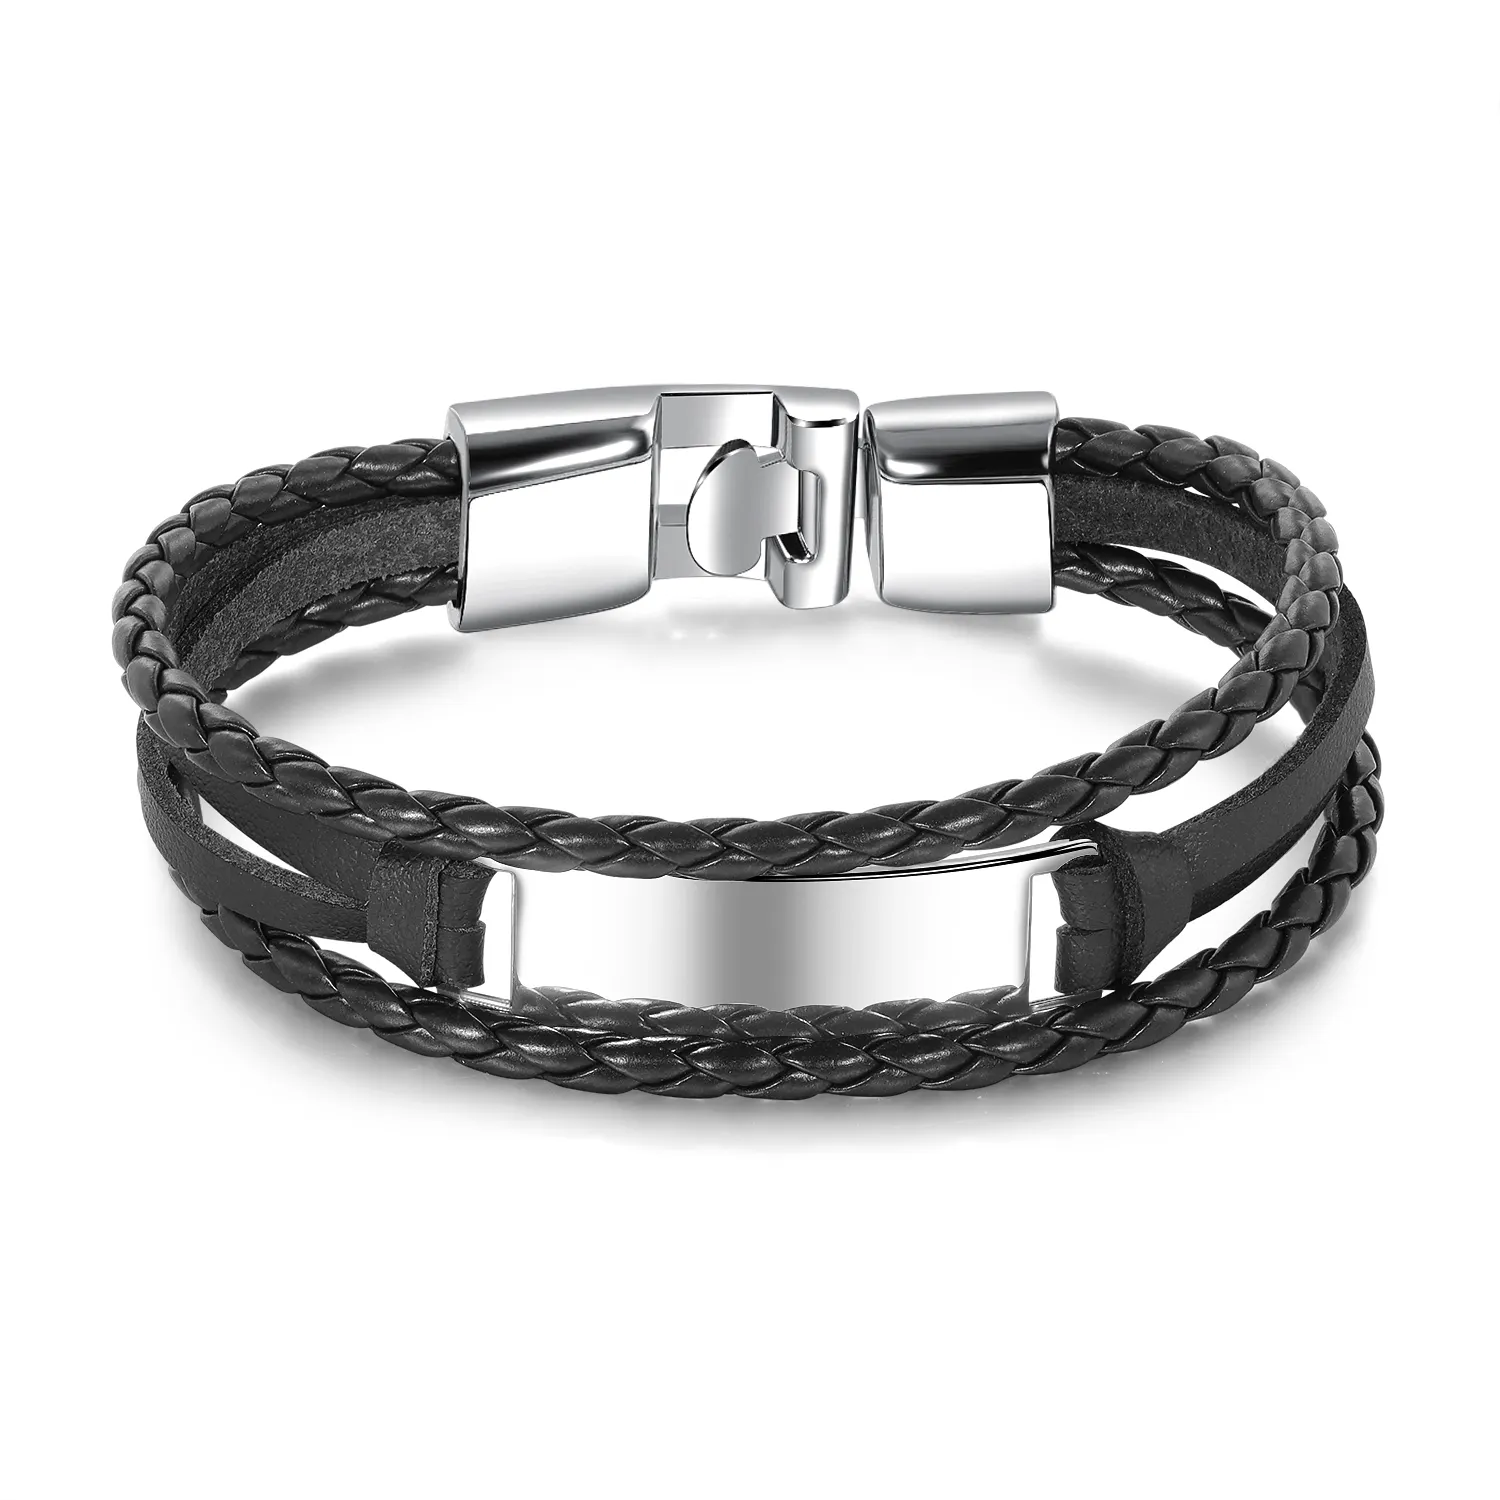 Best popular stainless steel braided multi-layered men bracelet with leather strap magnetic clasp jewelry